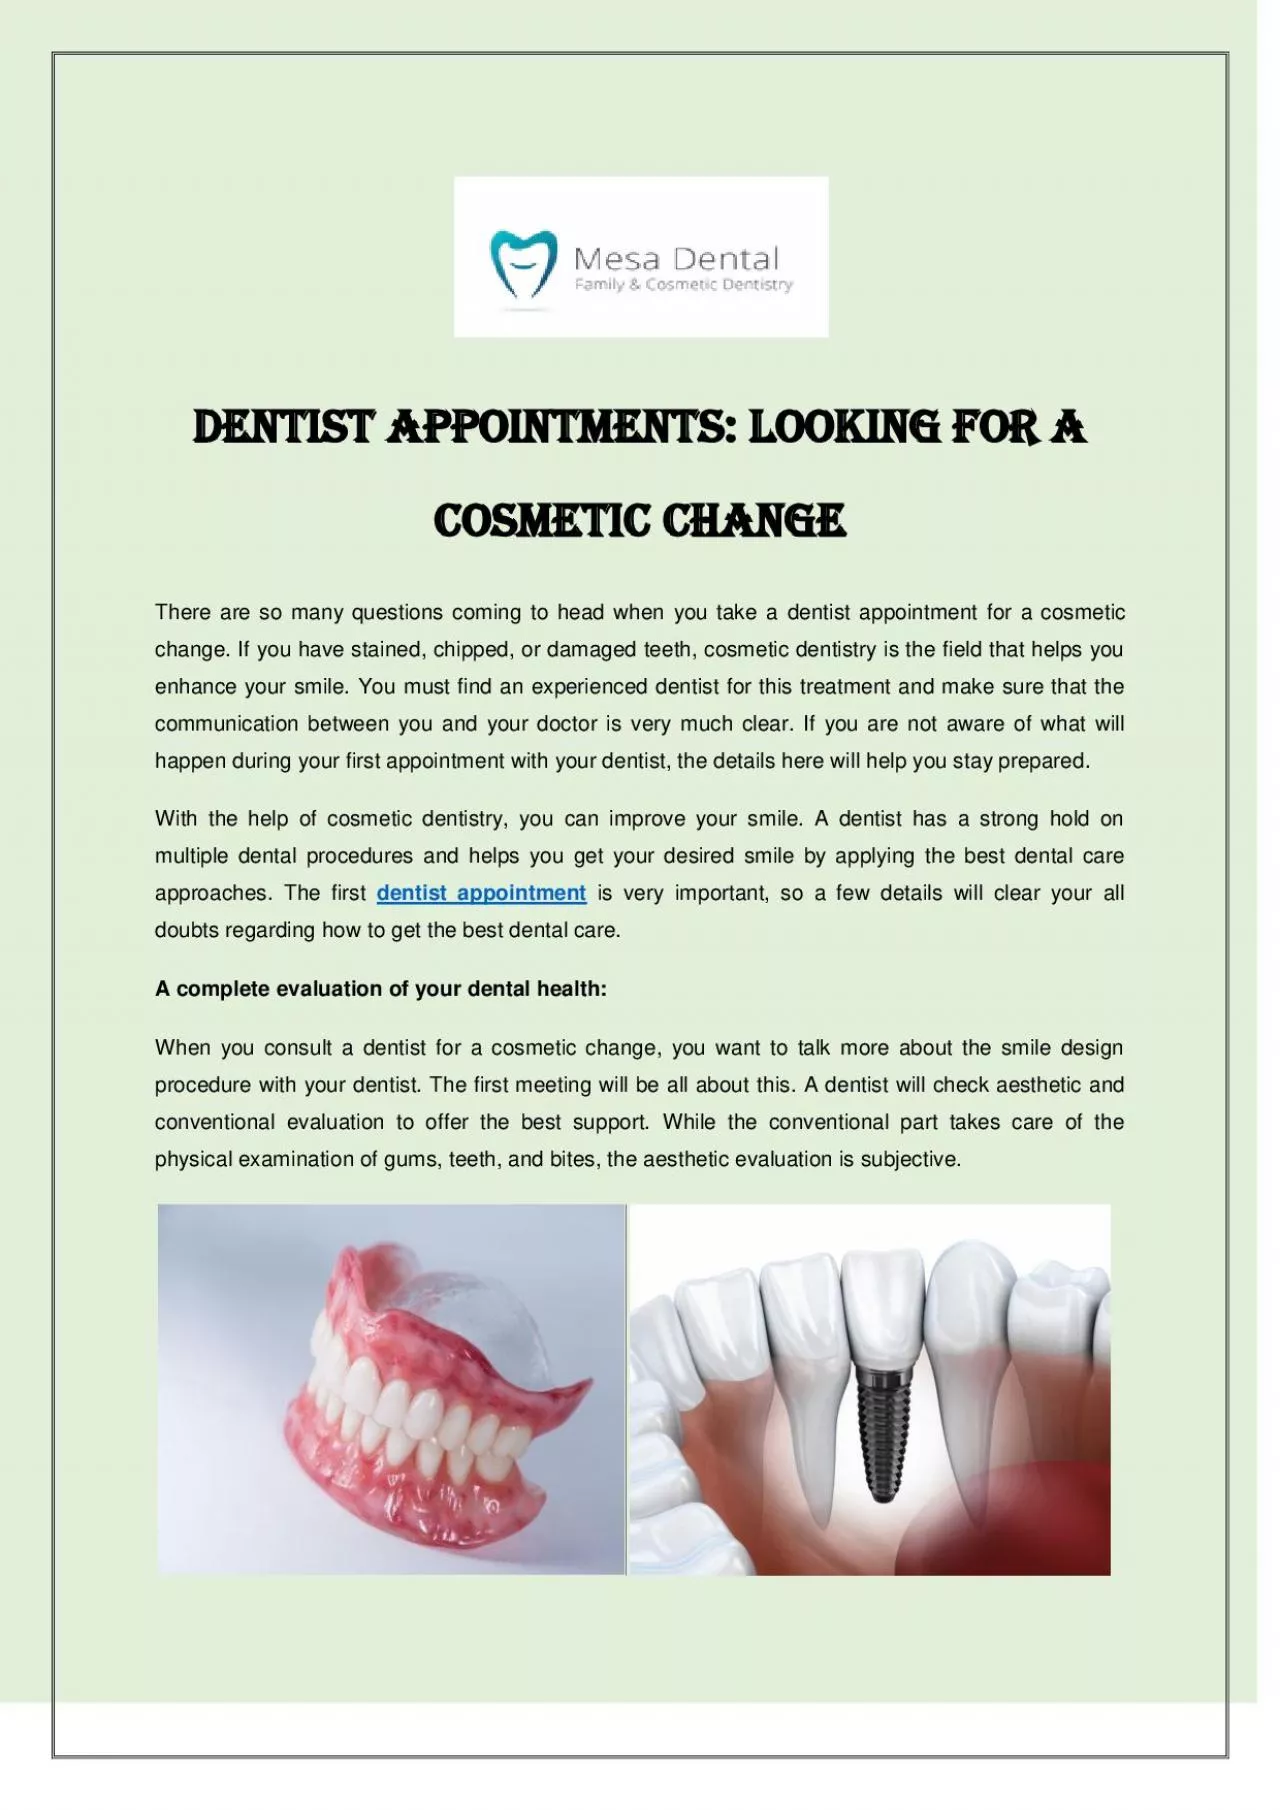 Dentist Appointments - Looking for a Cosmetic Change